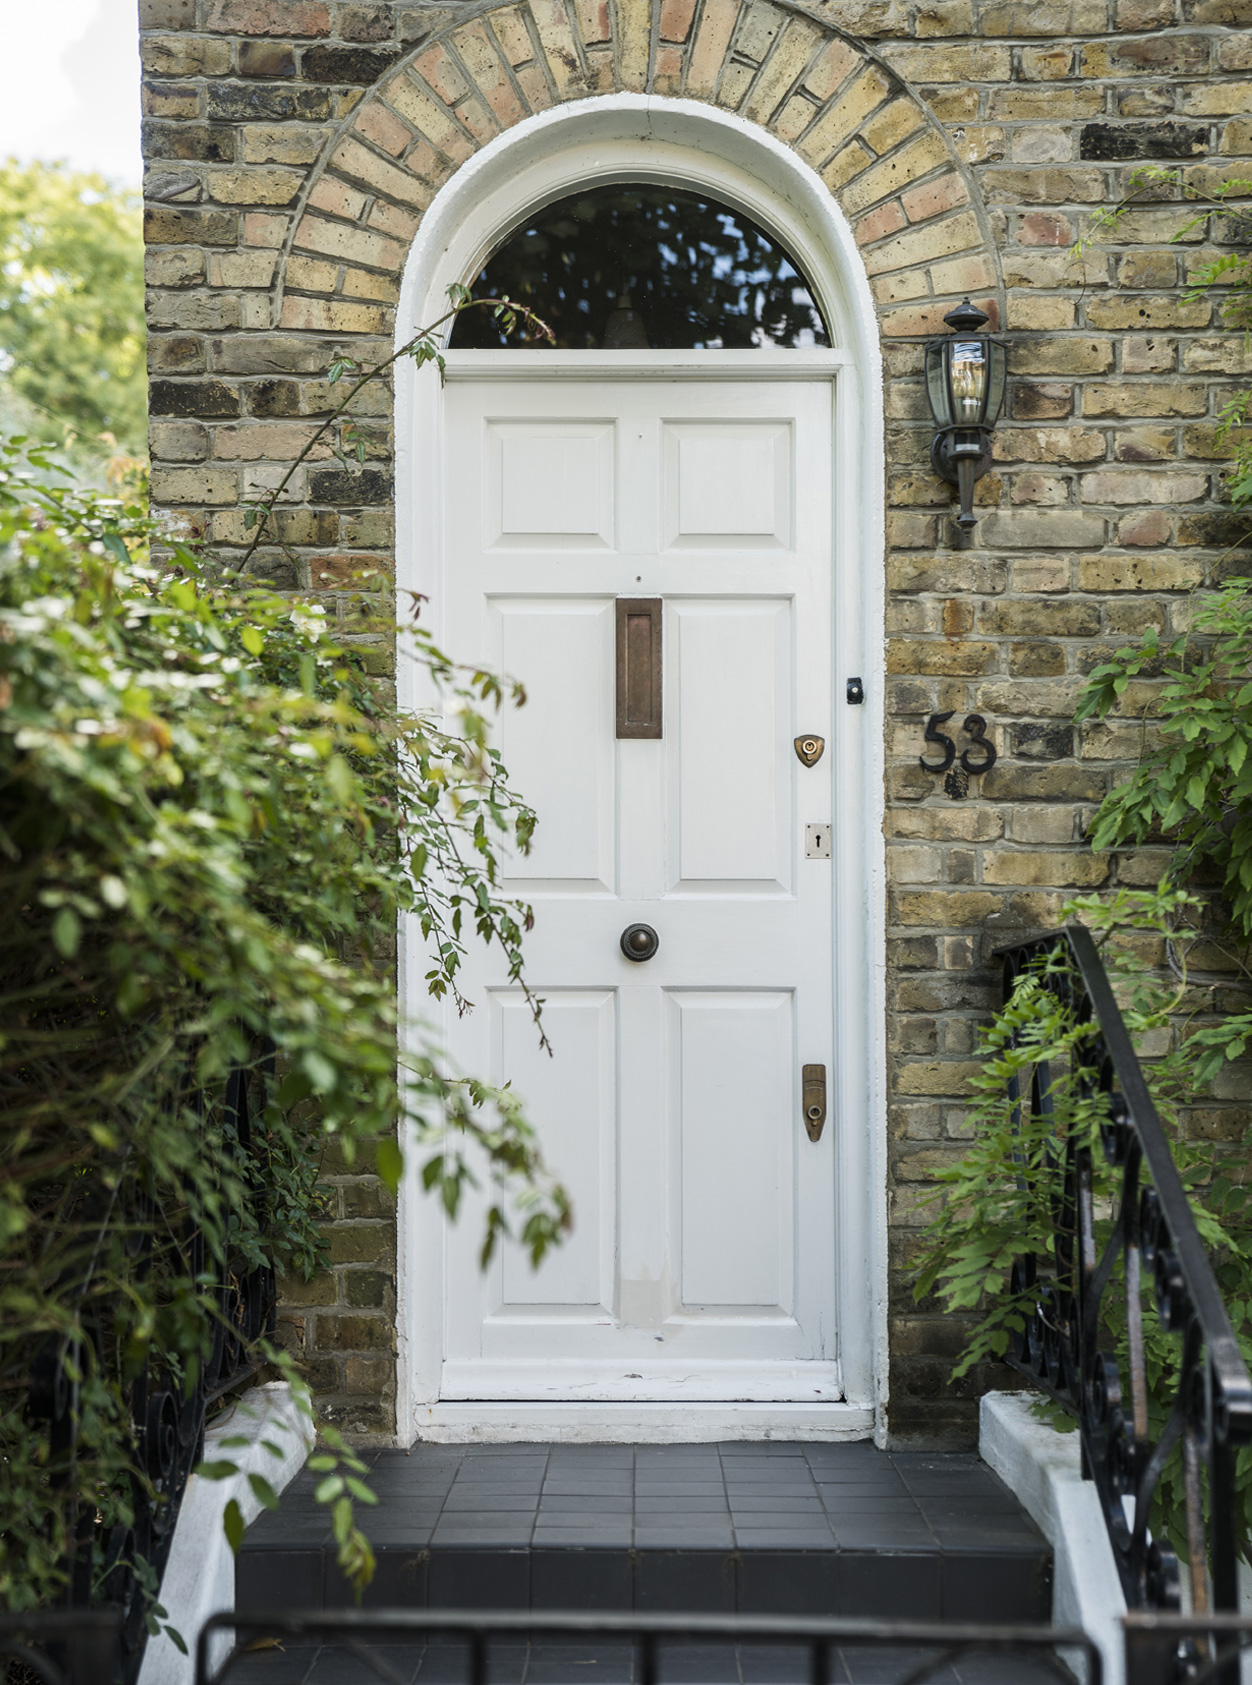 A classic hampstead townhouse frontage with a white front door, with surrounding greenery.